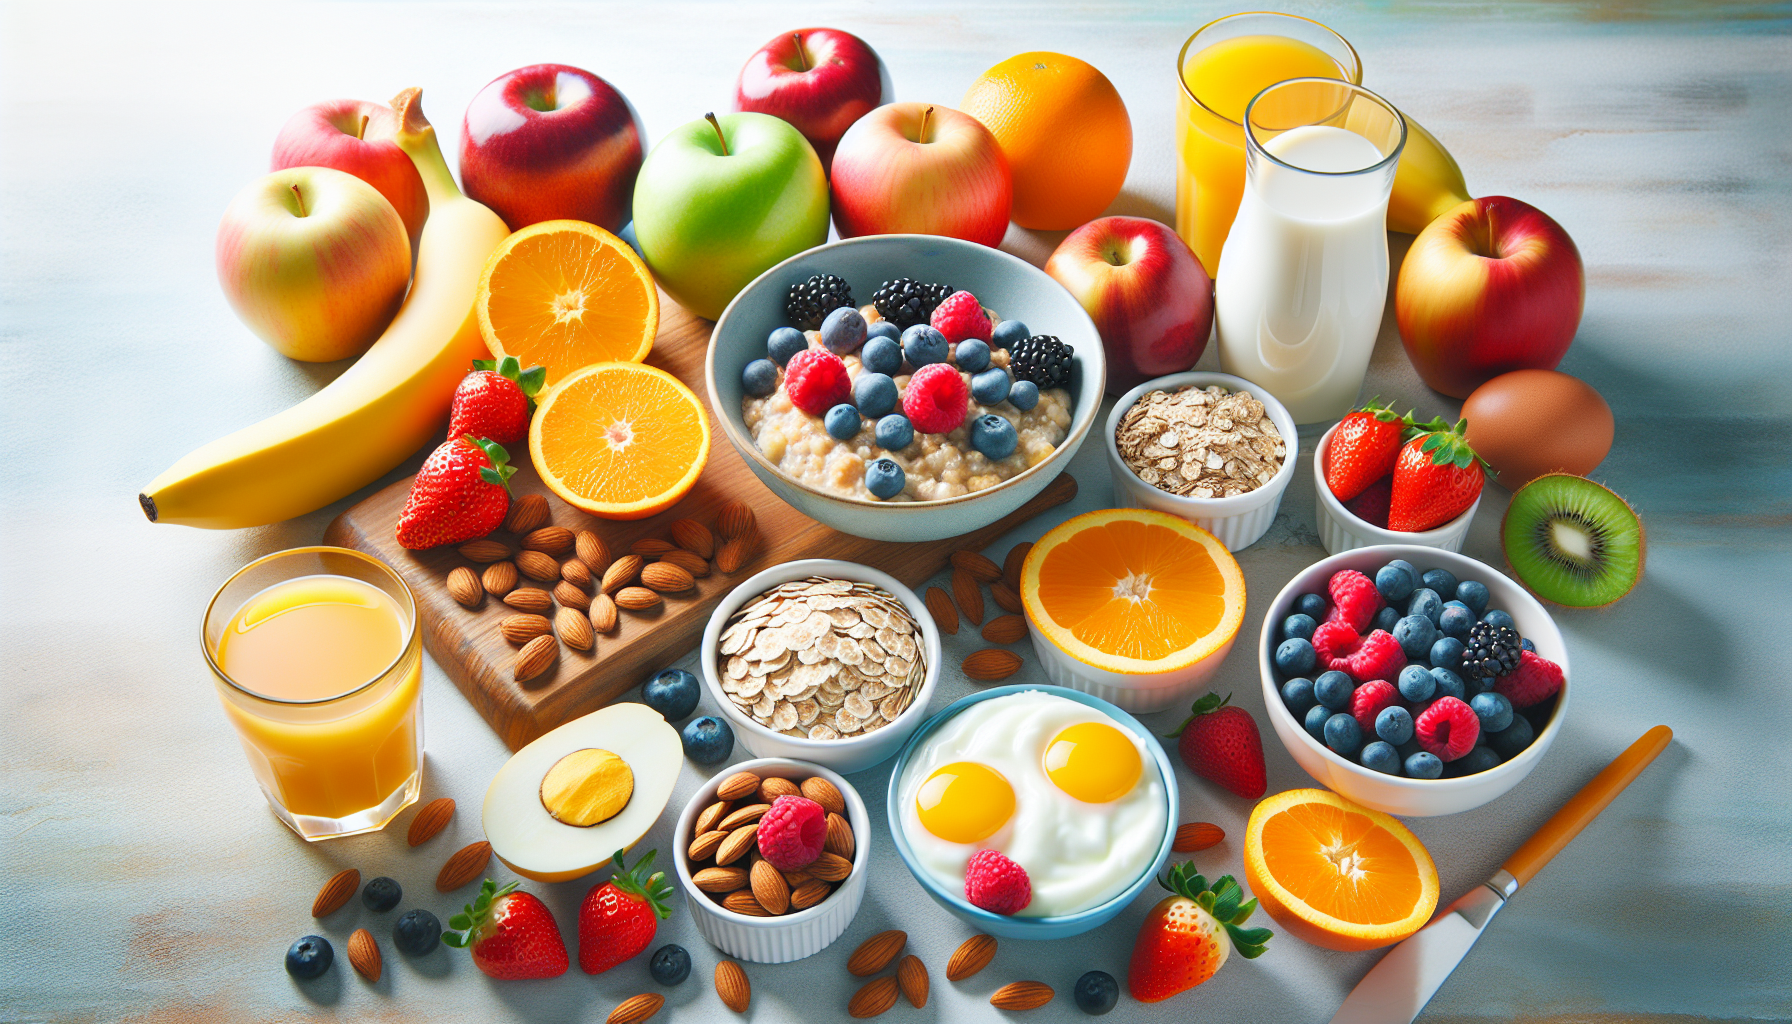 What Are Some Healthy Breakfast Options For Weight Loss?